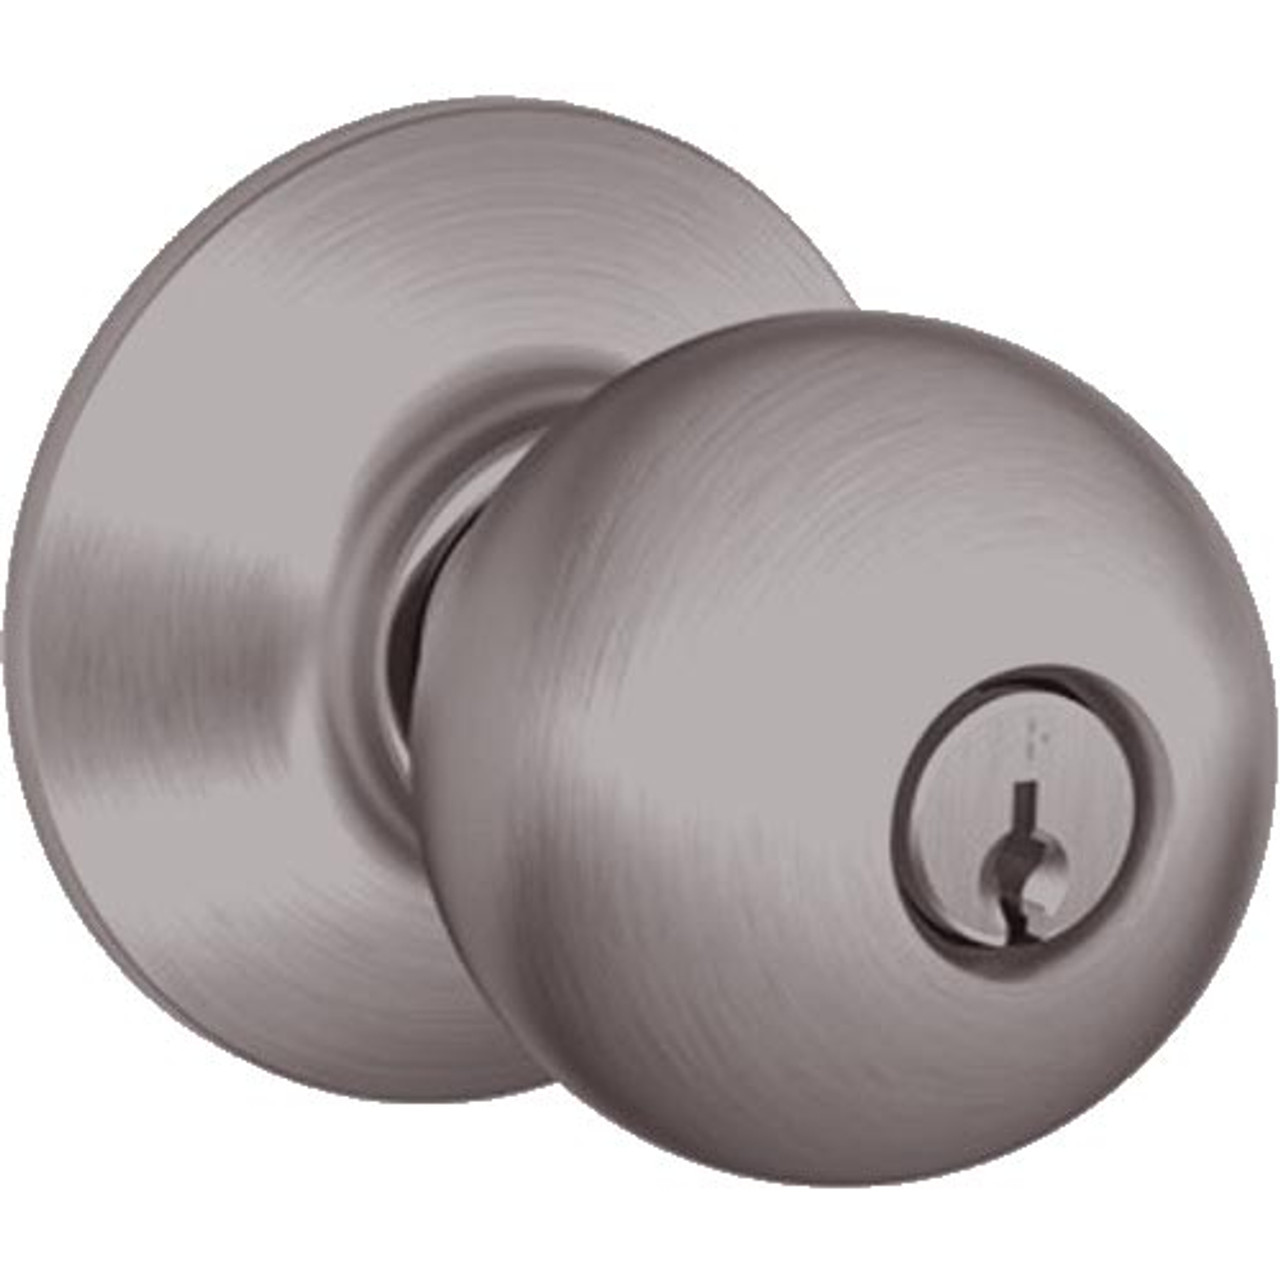 A70PD-ORB-613 Schlage Orbit Commercial Cylindrical Lock in Oil Rubbed Bronze